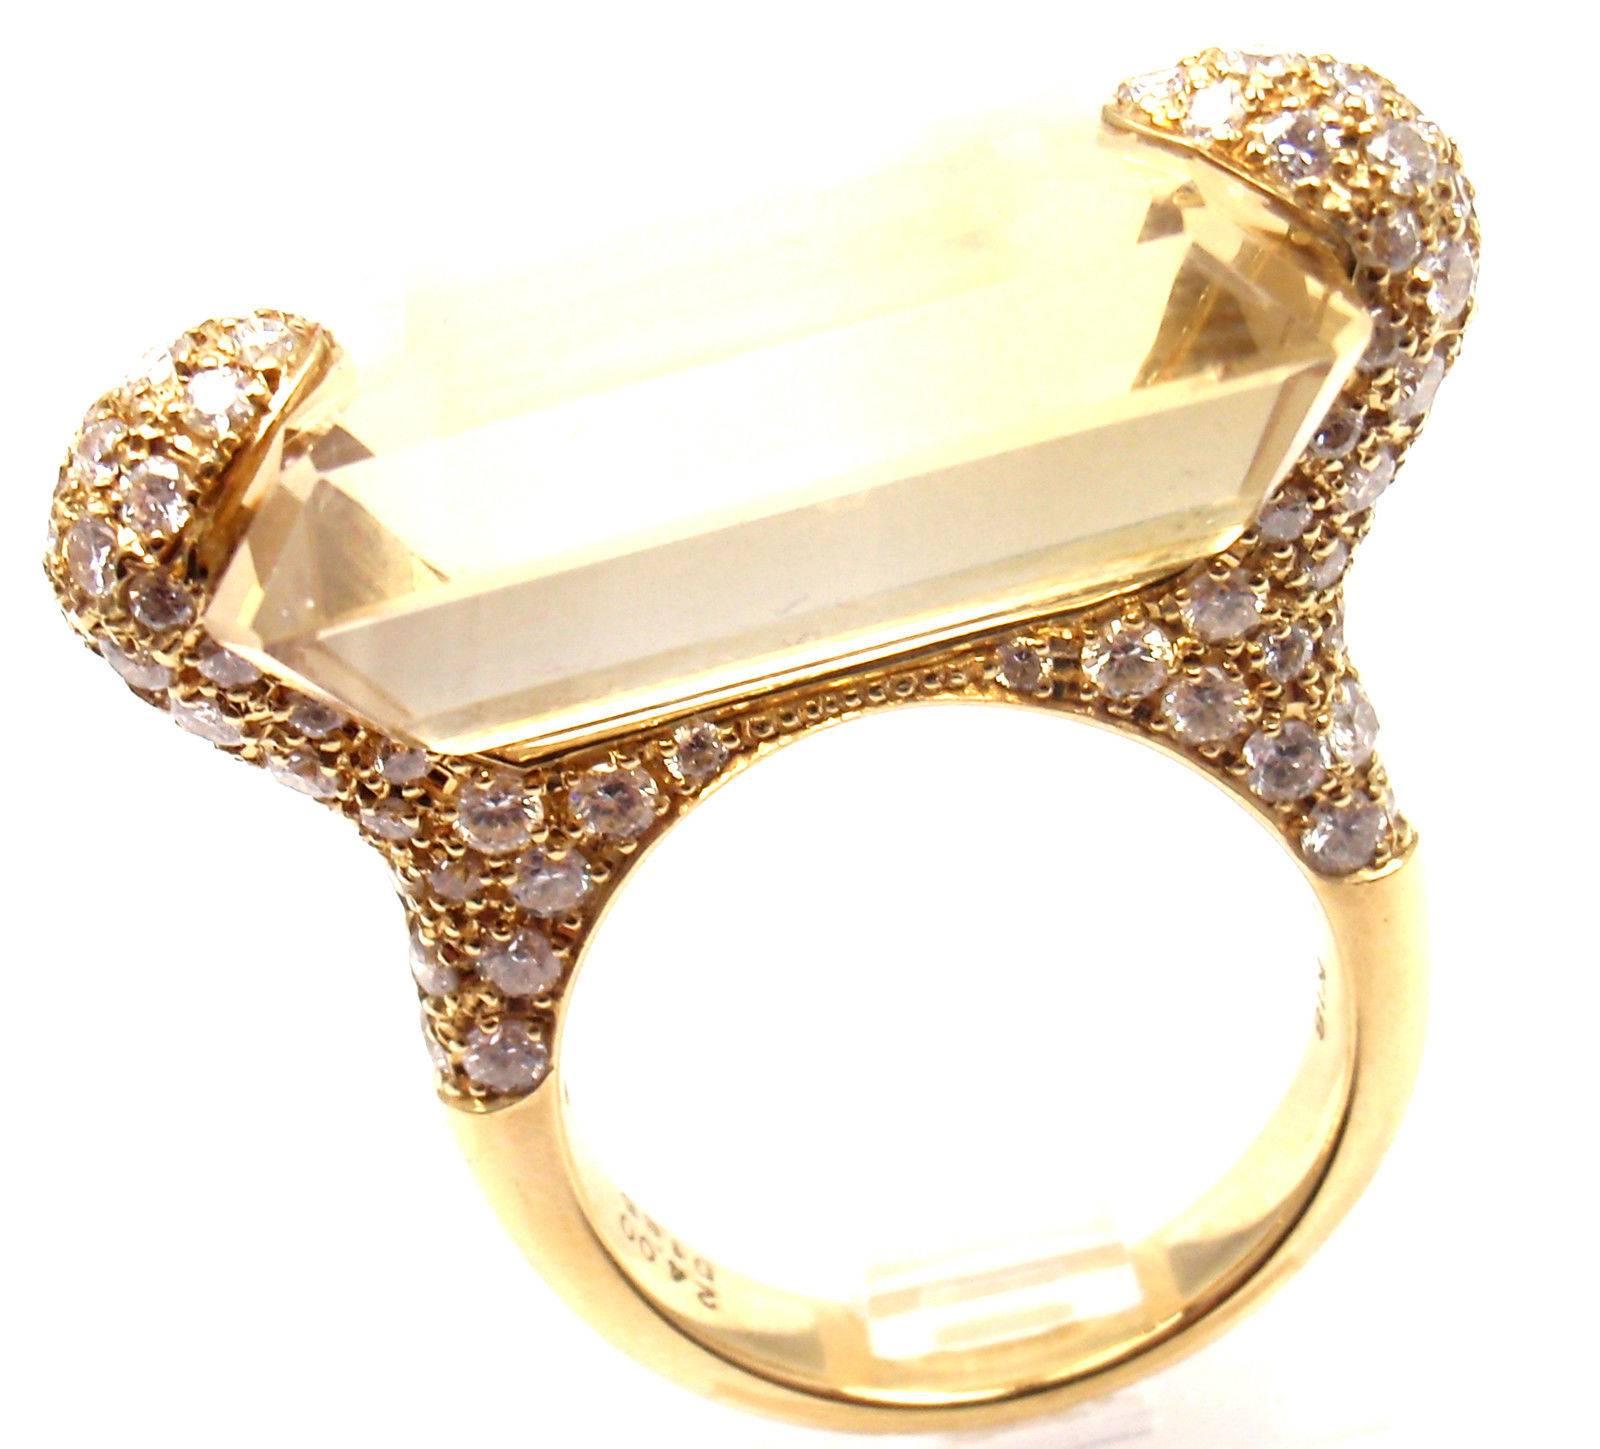 18k Yellow Gold And Diamond Estate European Large 24ct Citrine Ring. 
With 1 Emerald Shape Natural Citrine
Citrine Measurements 23 x 15 x 10mm
Color Golden Yellow
120 round brilliant cut diamonds VS2 clarity, G color total weight approx. 1.85ct